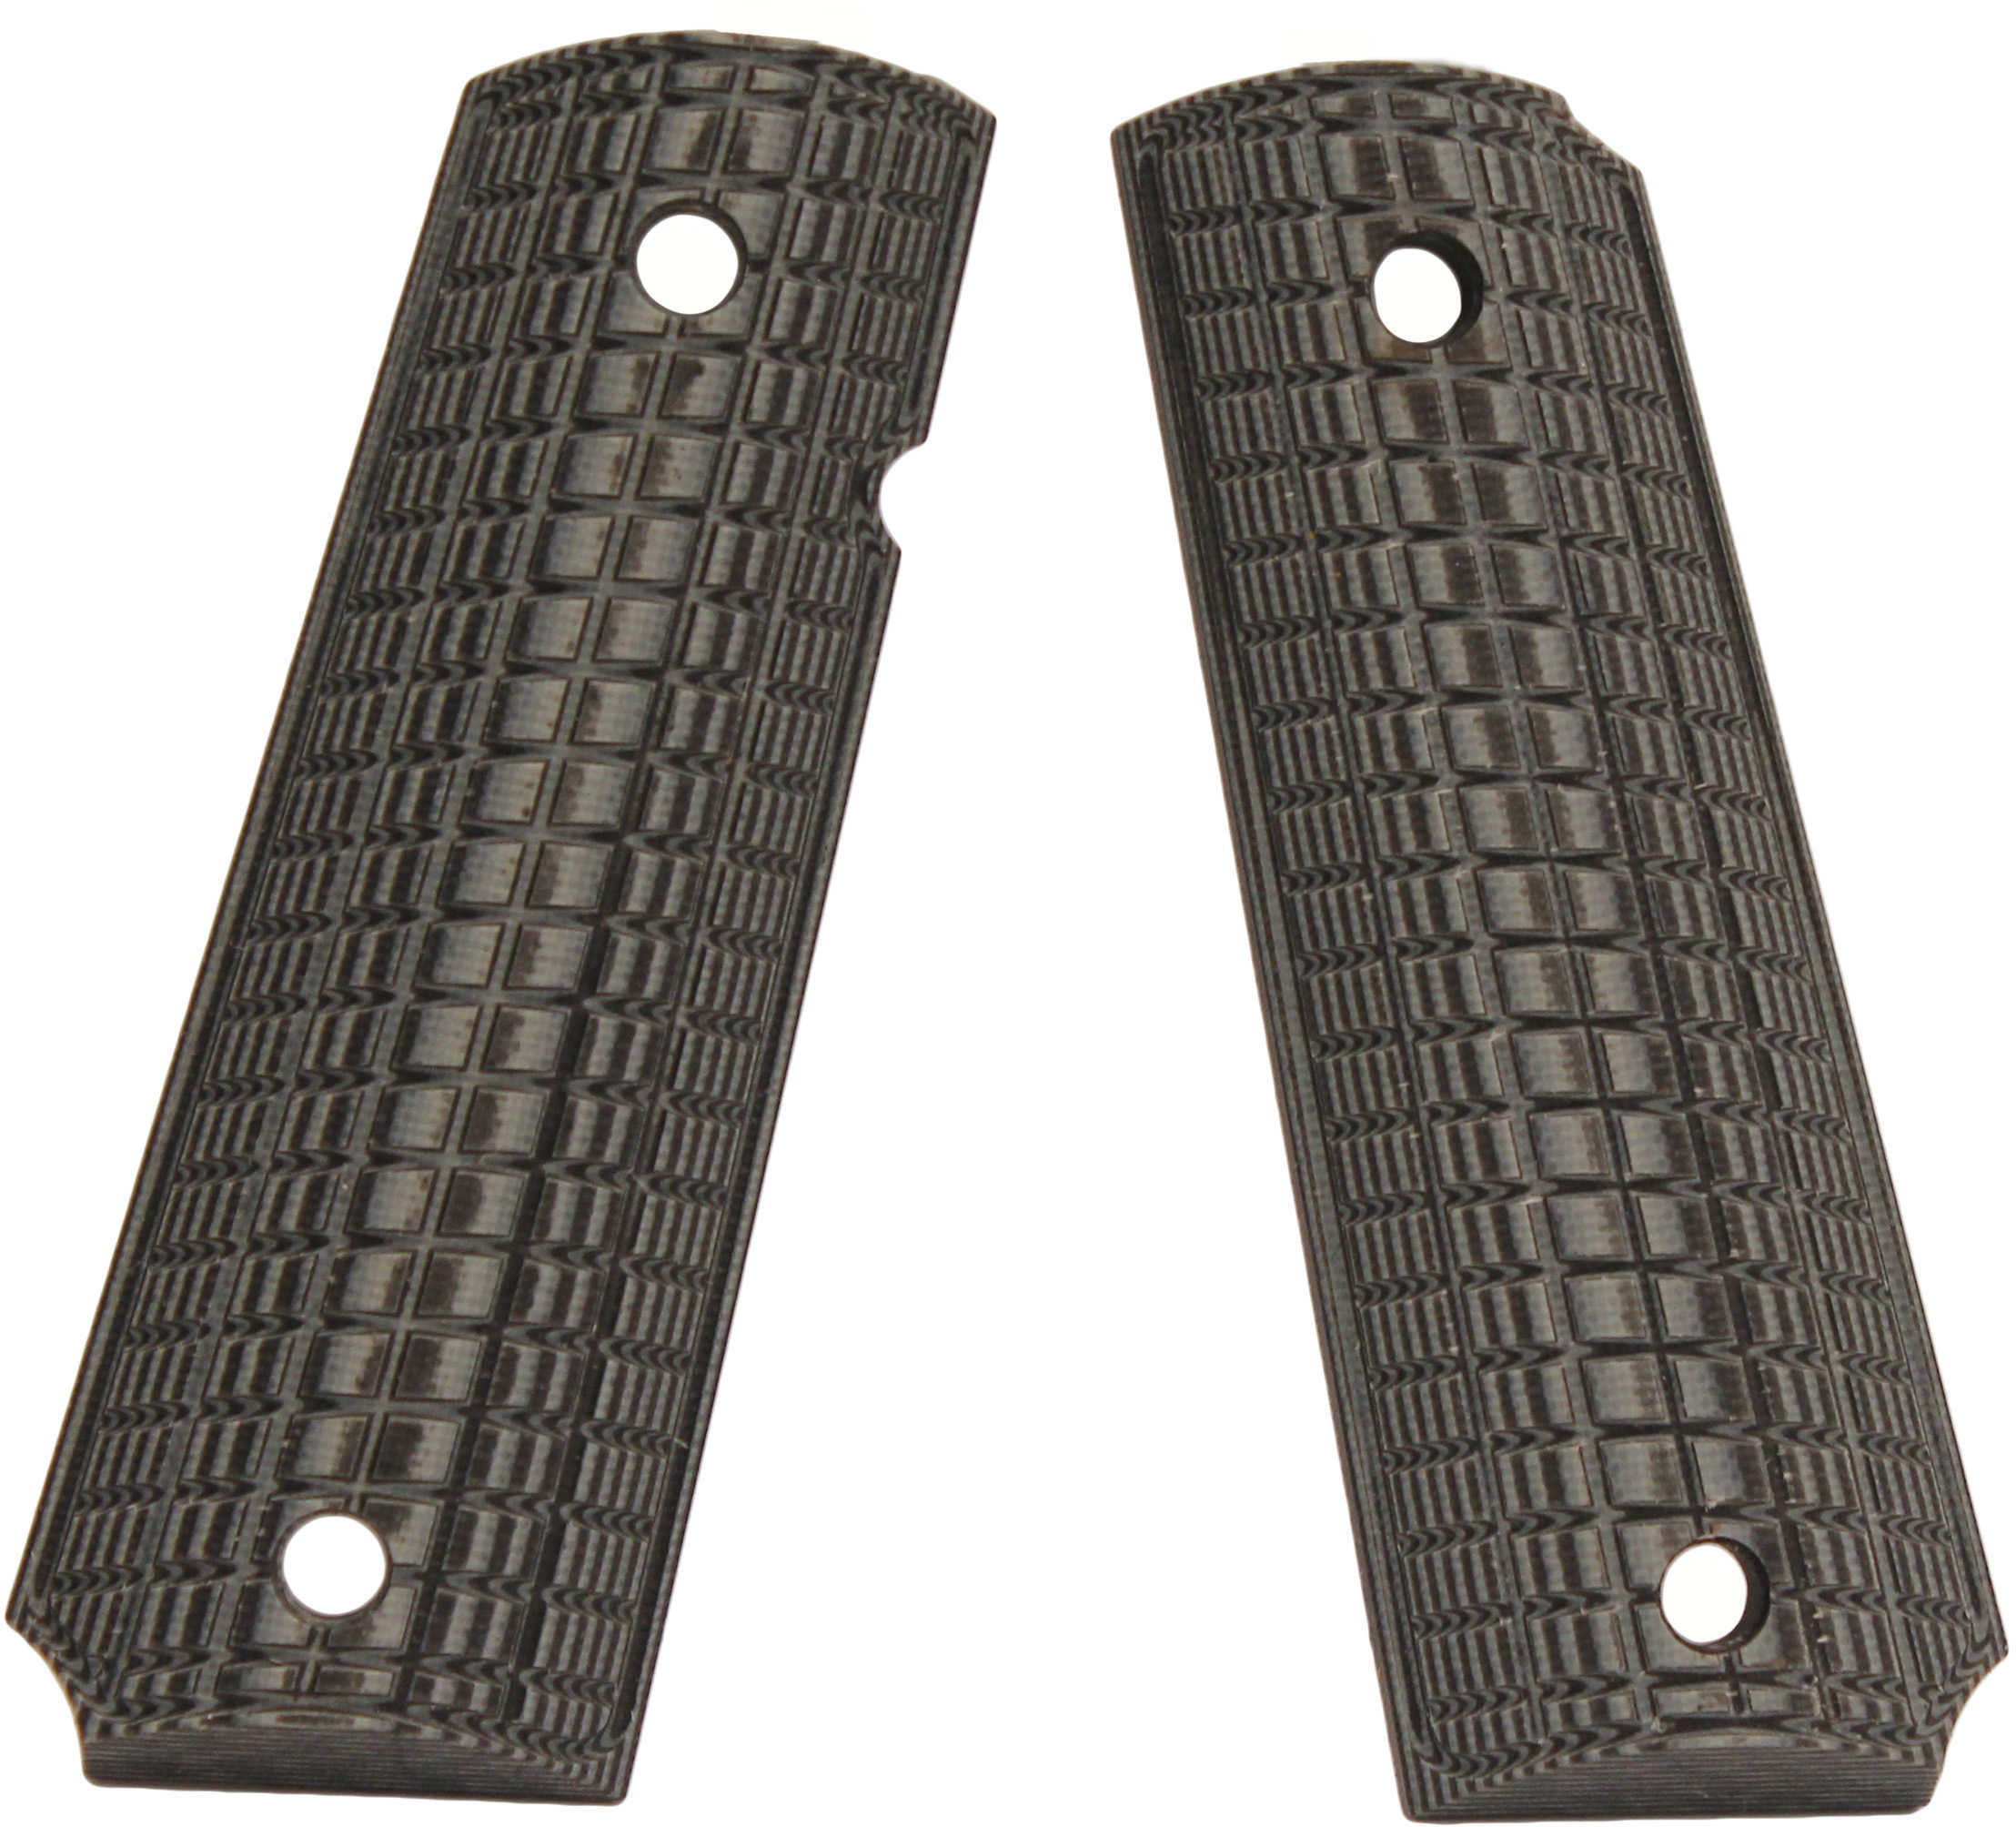 Pachmayr G10 Material Fits 1911 Gray/Black Grappler Finish 61011